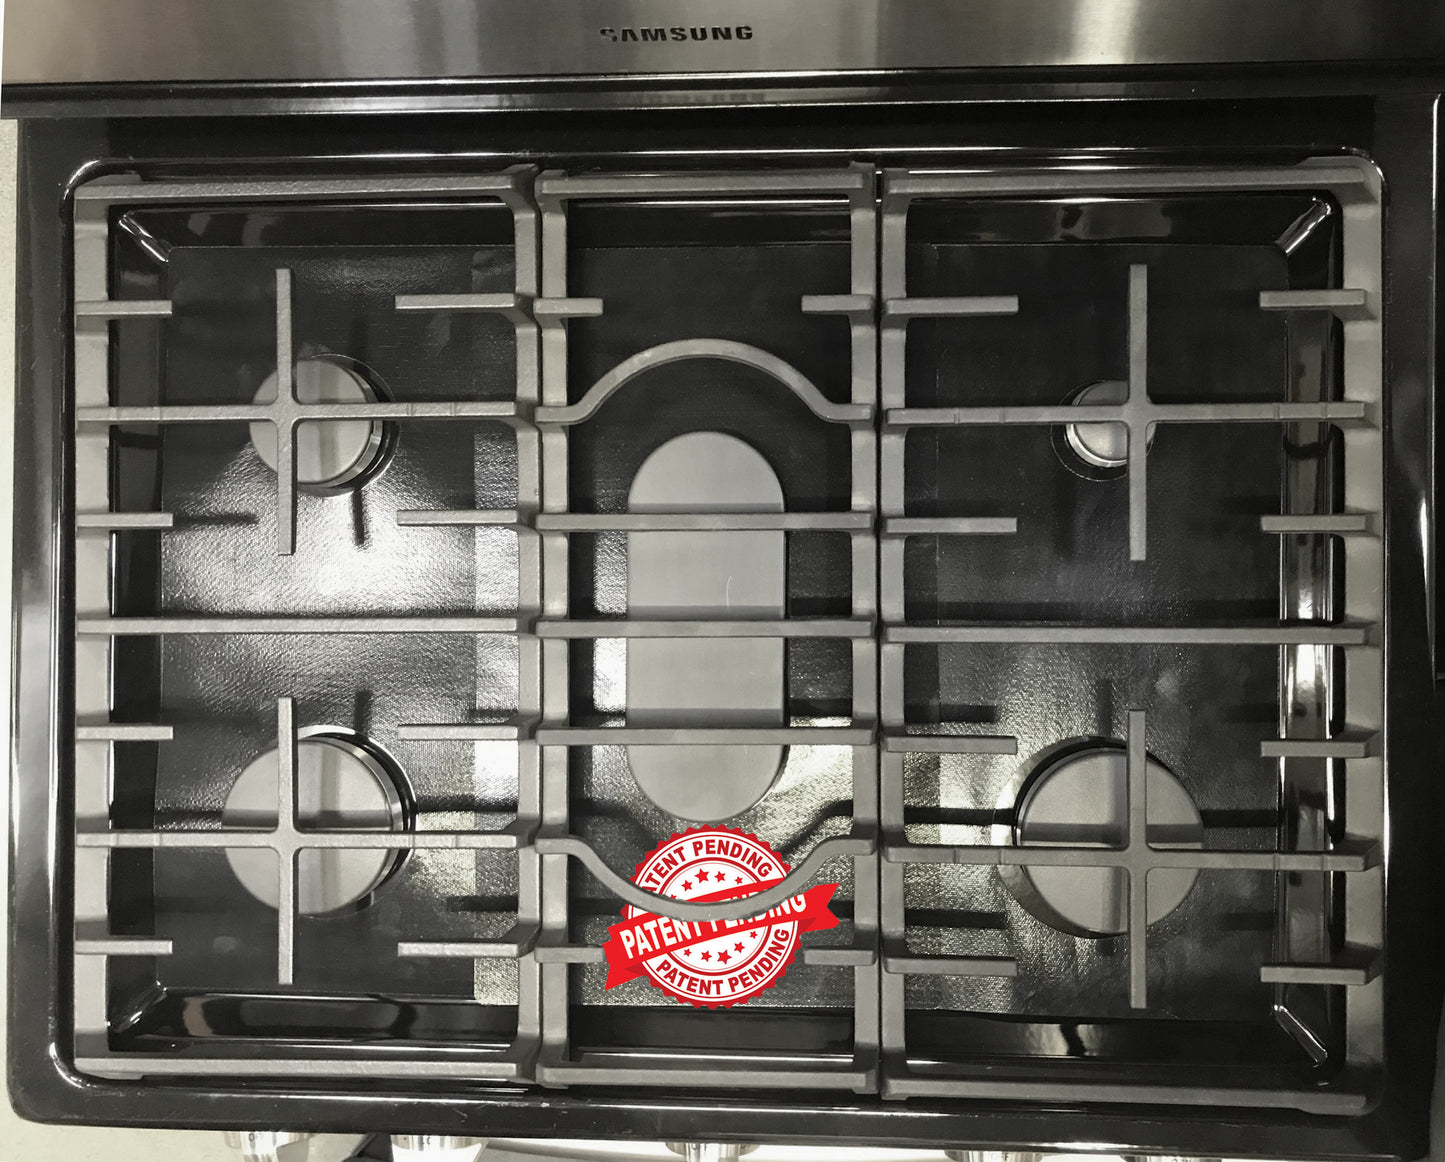 Kenmore Stove Protector Liners - Stove Top Protector for Kenmore Gas ranges - Customized - Easy Cleaning Stove Liners